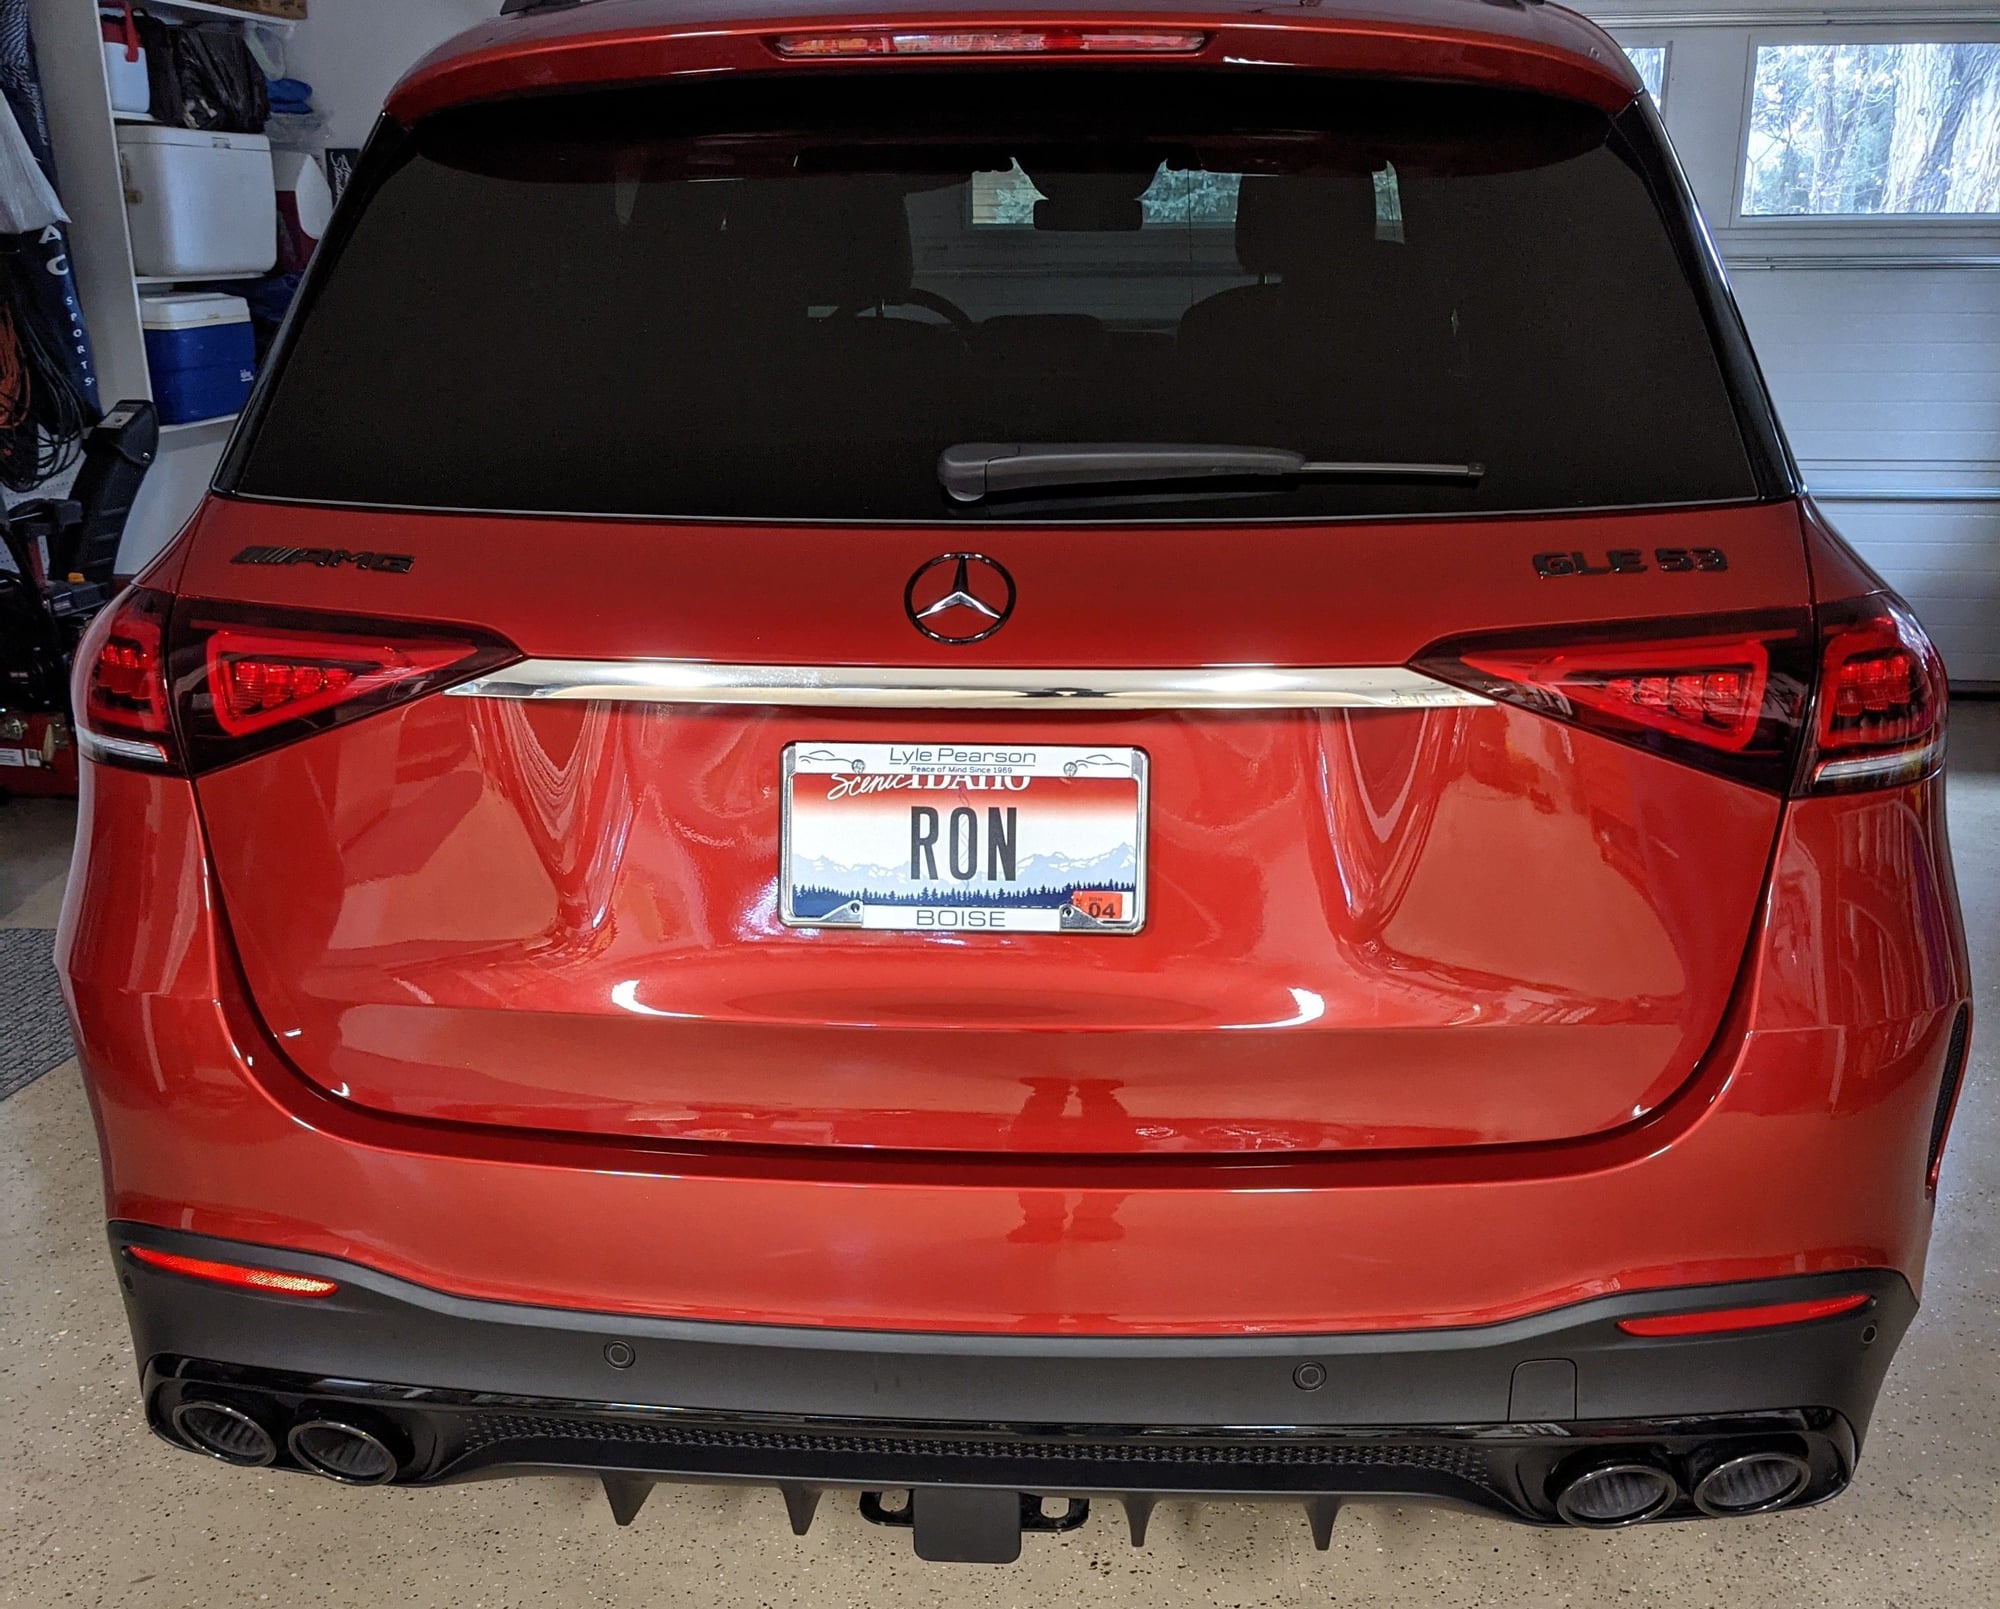 2021 Mercedes-Benz GLE-Class - Primo 2021 AMG GLE 53, Cardinal Red with Night Pkg - Used - VIN 4JGFB6BB3MA360722 - 6 cyl - AWD - Automatic - SUV - Red - Boise, ID 83704, United States